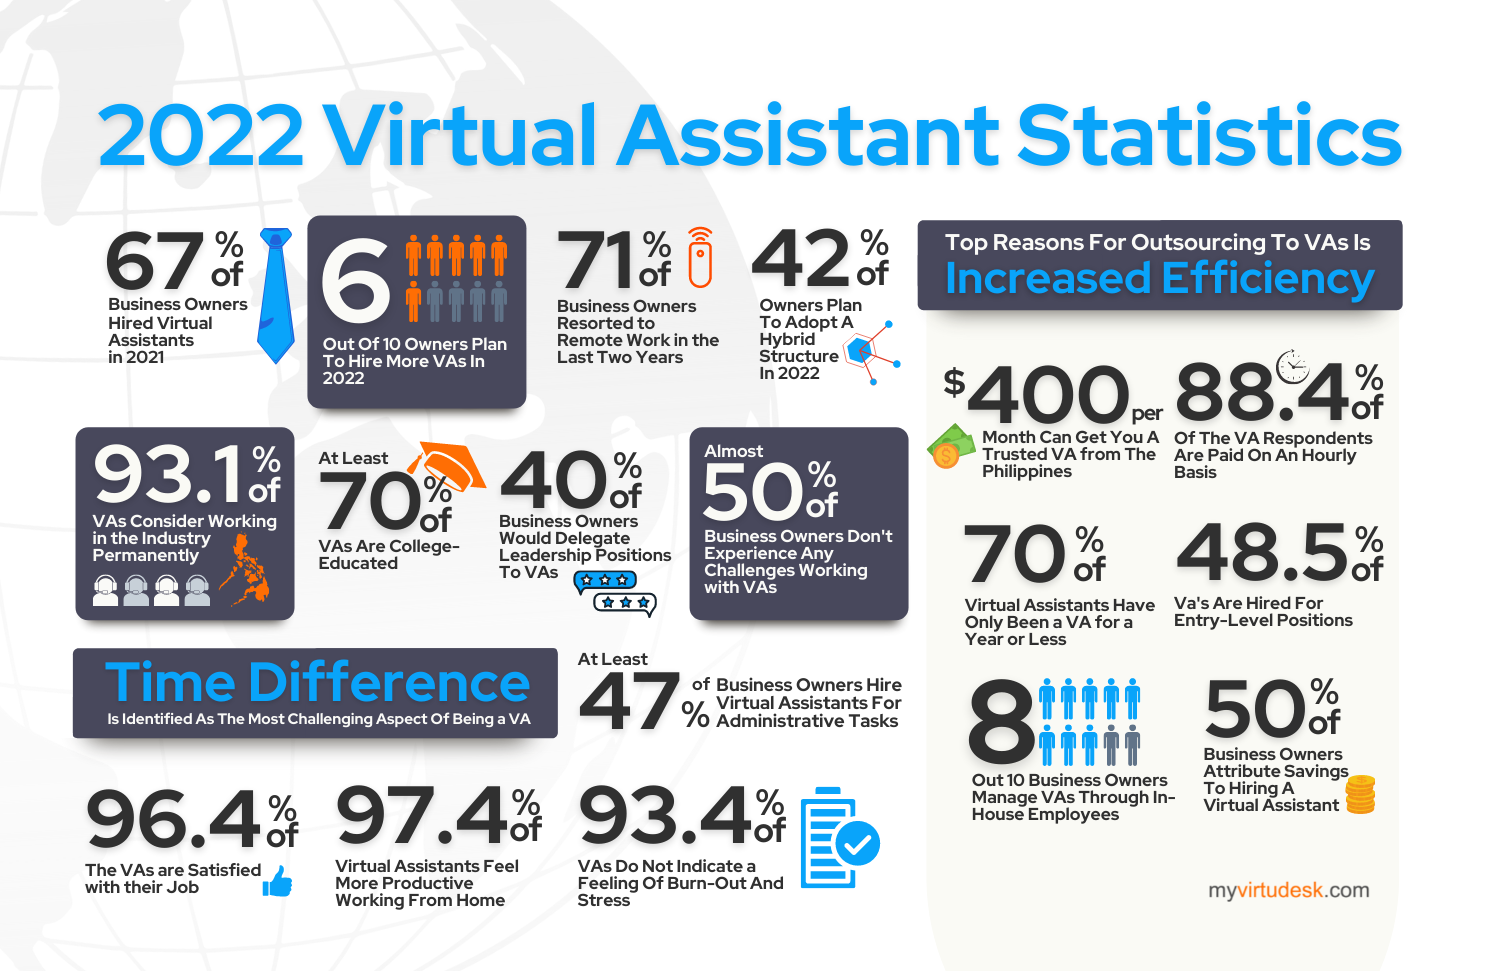 How to Hire a Virtual Assistant for Your Business